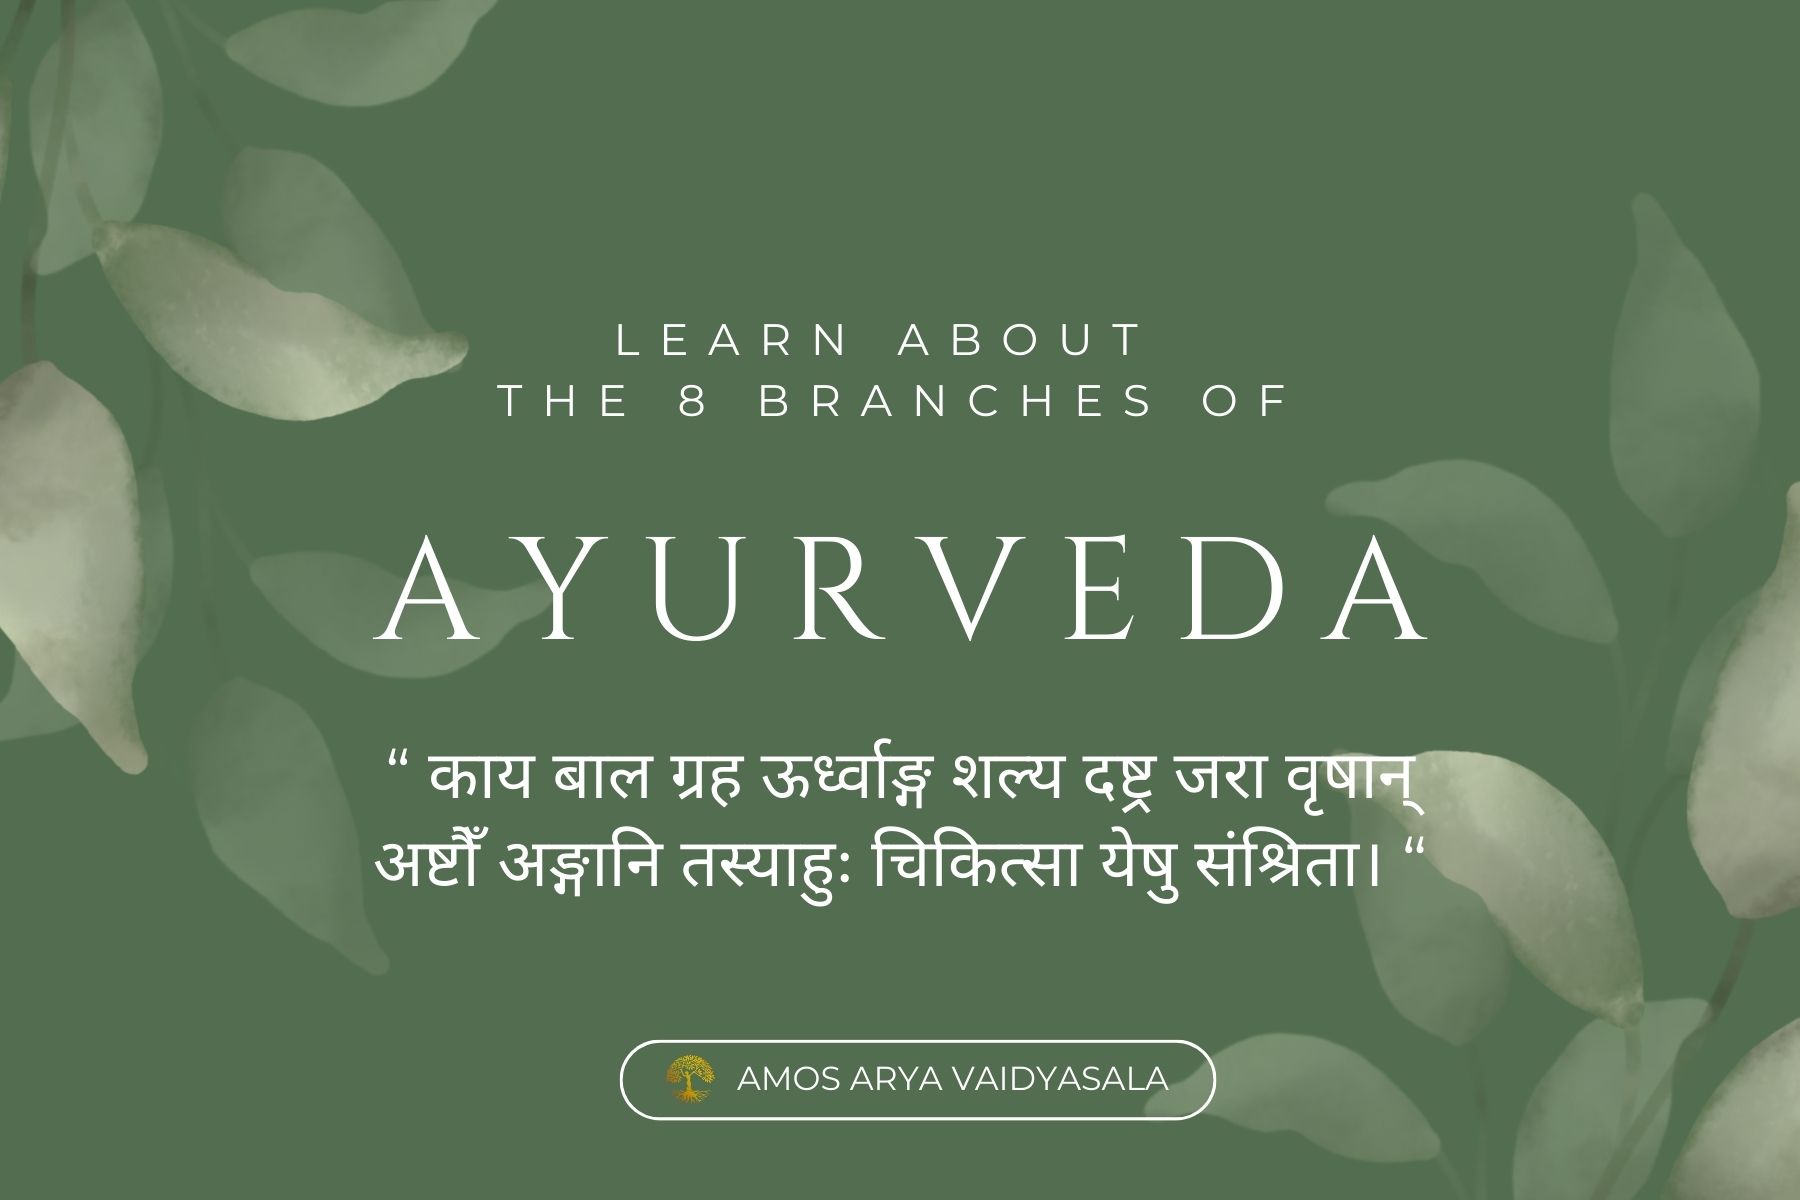 8 branches of Ayurveda